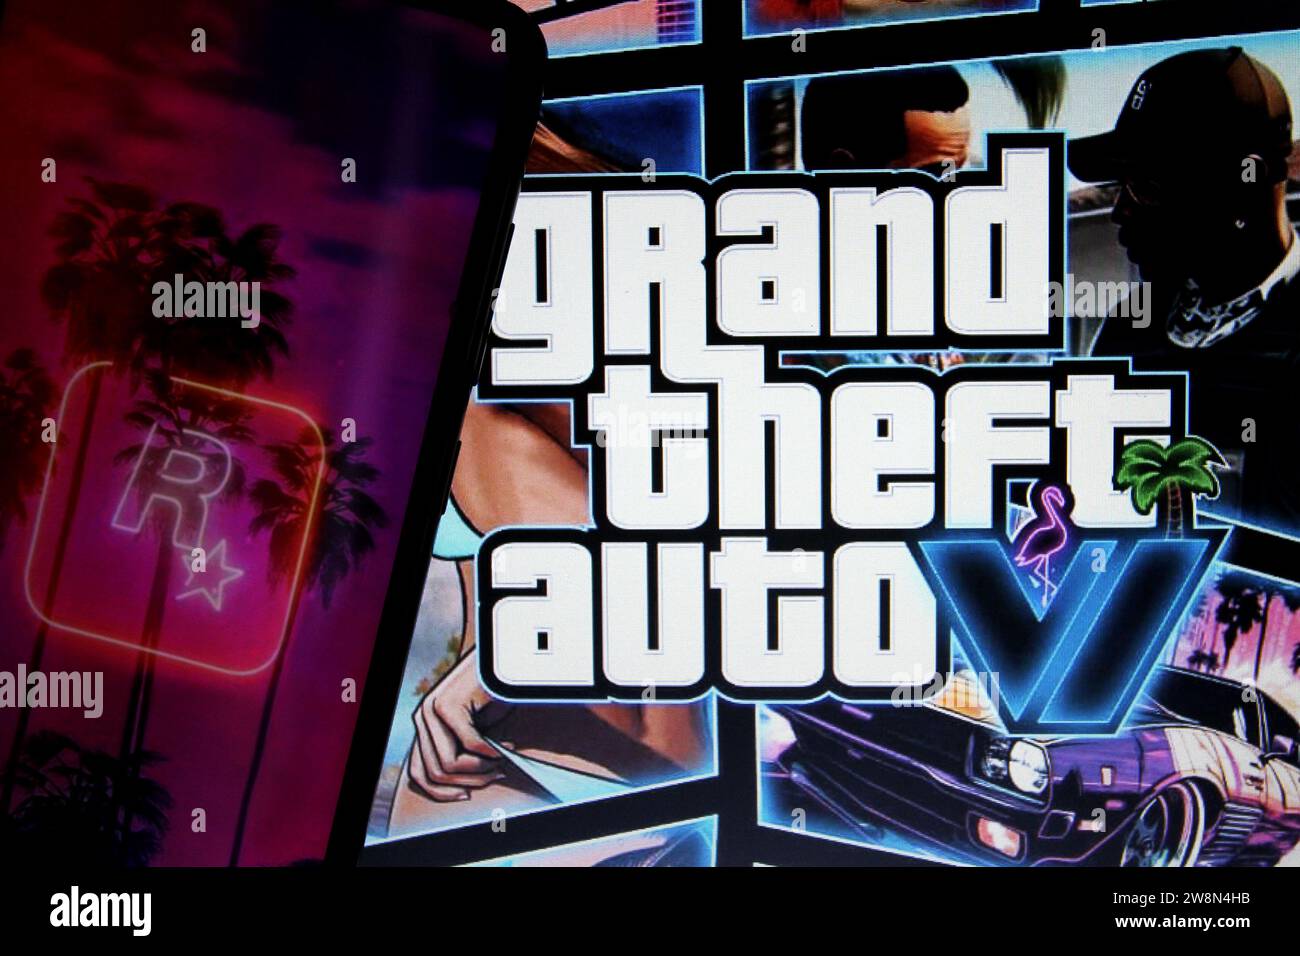 December 21, 2023: An 18-year-old hacker who leaked clips of a forthcoming Grand Theft Auto (GTA) game has been sentenced to an indefinite hospital order. Arion Kurtaj from Oxford, who is autistic, was a key member of international gang Lapsus$. The gang's attacks on tech giants including Uber, Nvidia and Rockstar Games cost the firms nearly $10m. He will remain at a secure hospital for life unless doctors deem him no longer a danger. FILE: December 7, 2023: Indonesia: Rockstar Games Grand Theft Auto VI (GTA VI) which is planned to be released in 2025. (Credit Image: © Angga Budhiyanto/ZUMA Pr Stock Photo